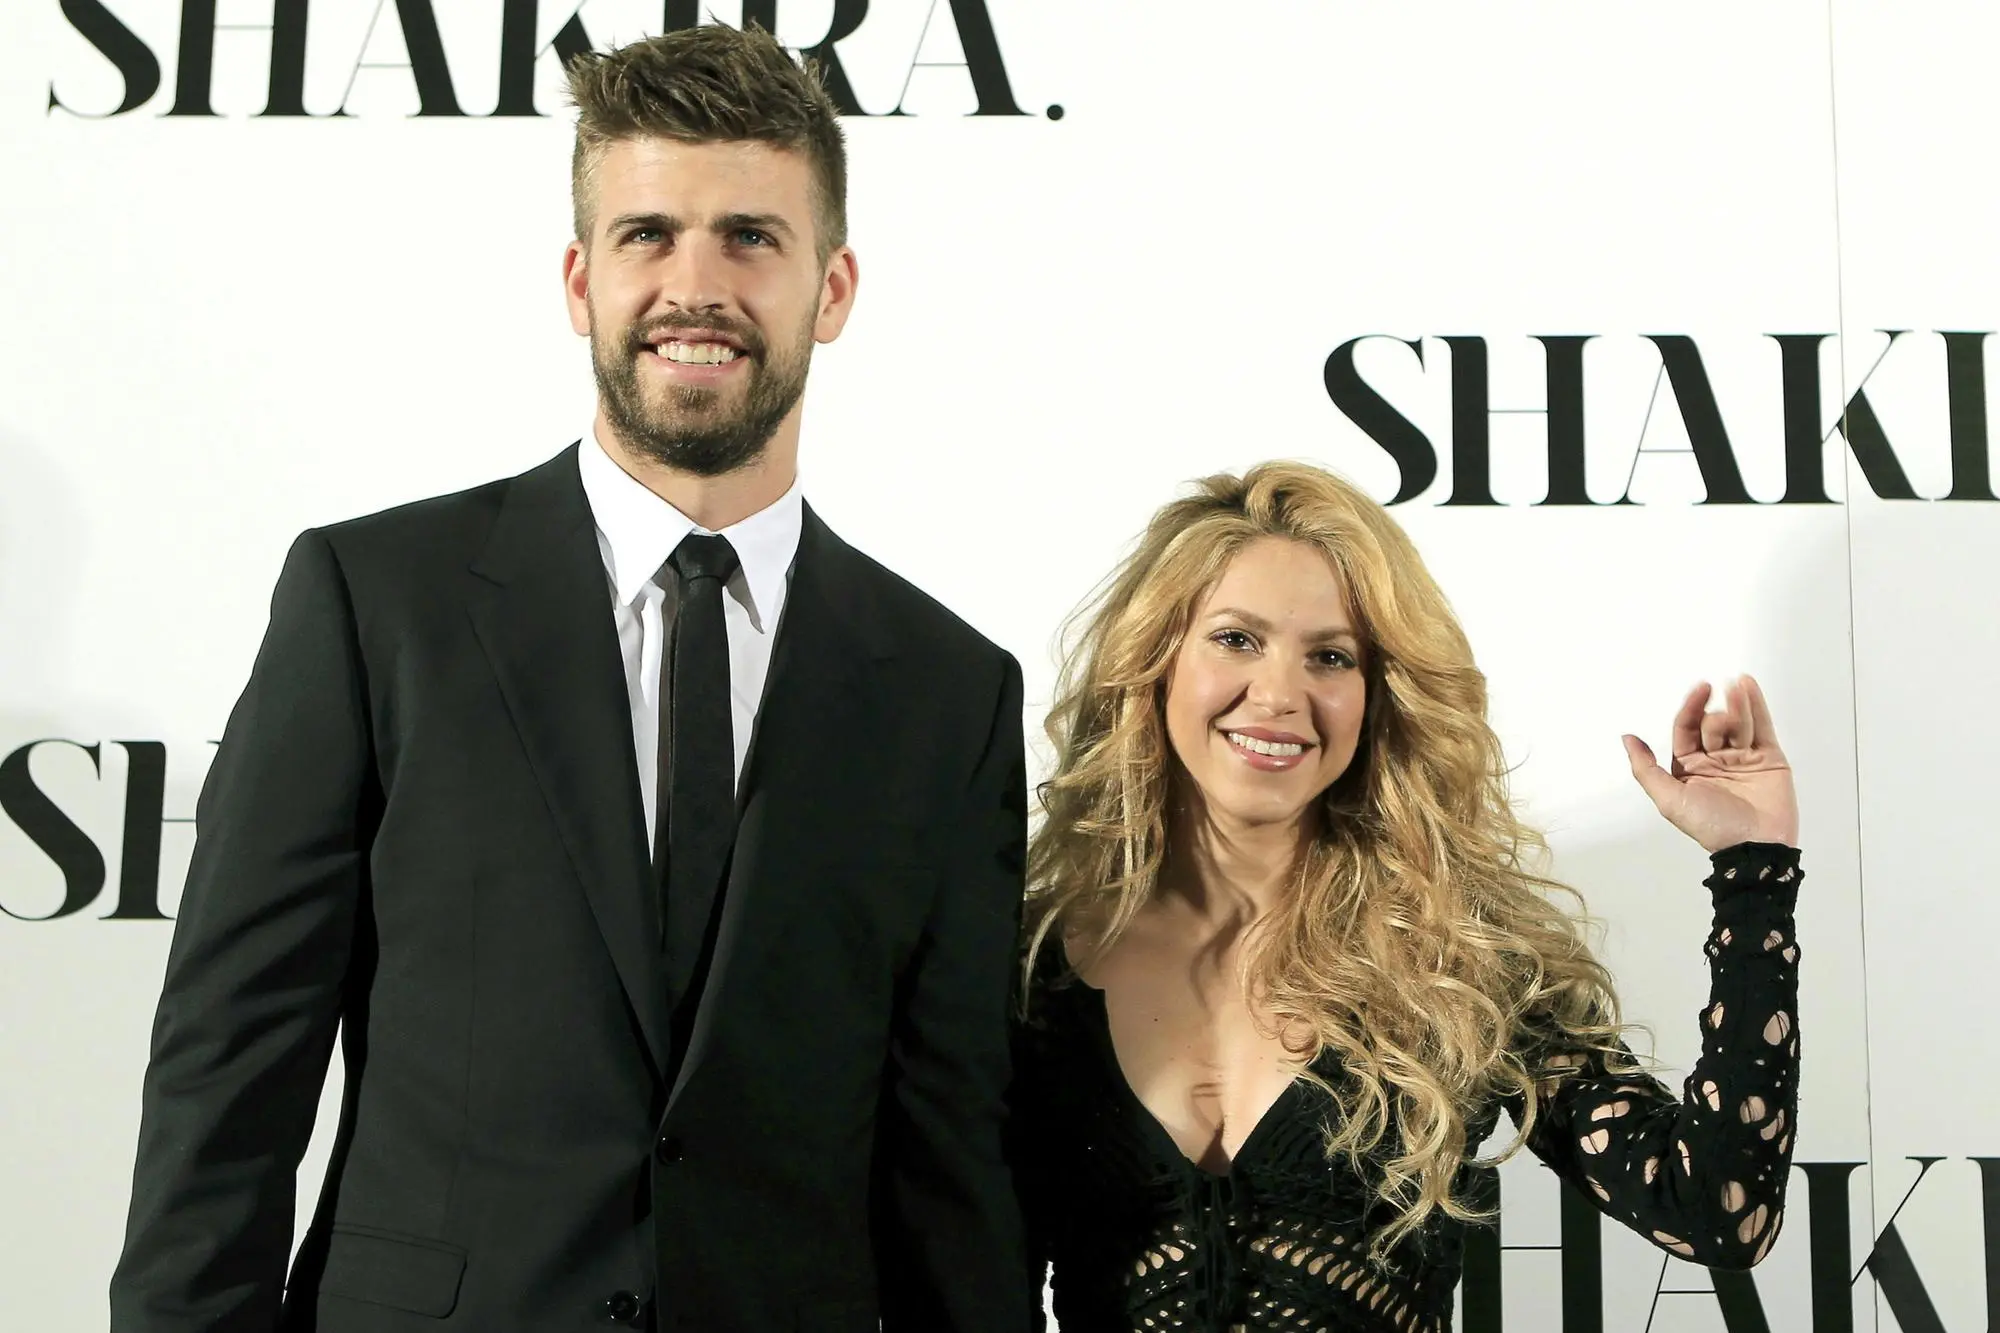 epa09995331 (FILE) - Colombian singer Shakira (R) poses for the media with her partner, FC Barcelona defender Gerard Pique (L), during the presentation of her new album 'Shakira' in Barcelona, Spain, 20 March 2014 (reissued 04 June 2022). Shakira confirmed that she is separating from the soccer player Pique in a statement released on 04 June 2022. The couple has two children together. EPA/ANDREU DALMAU